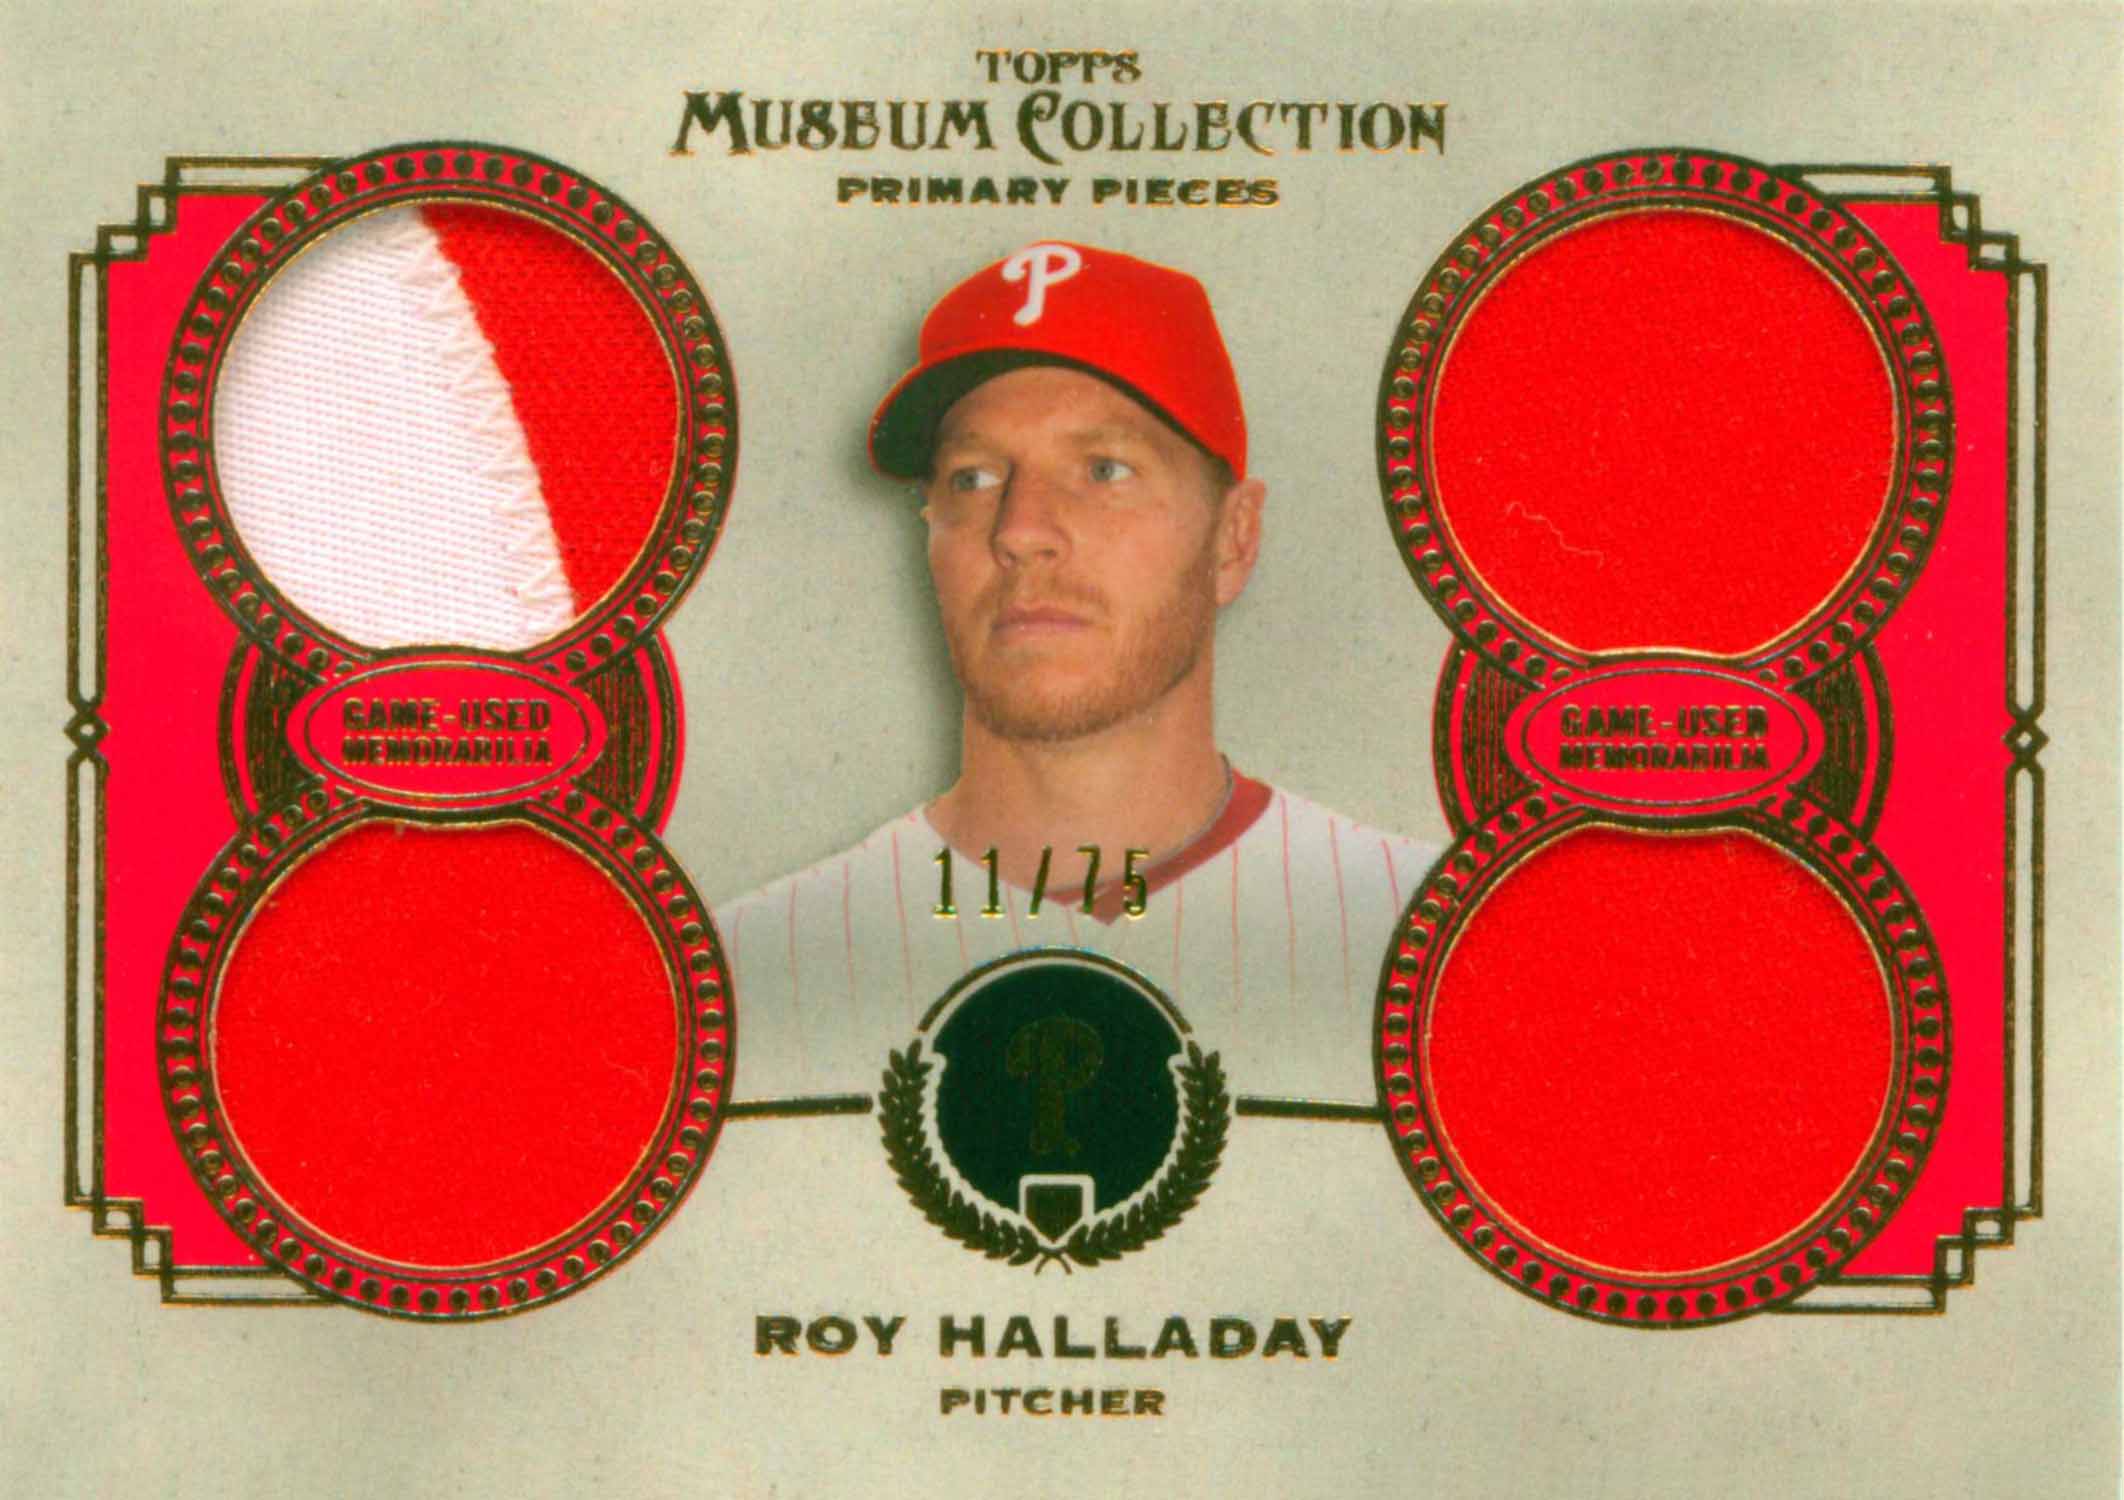 2013 Topps Museum Collection Primary Pieces Quad Relics Copper